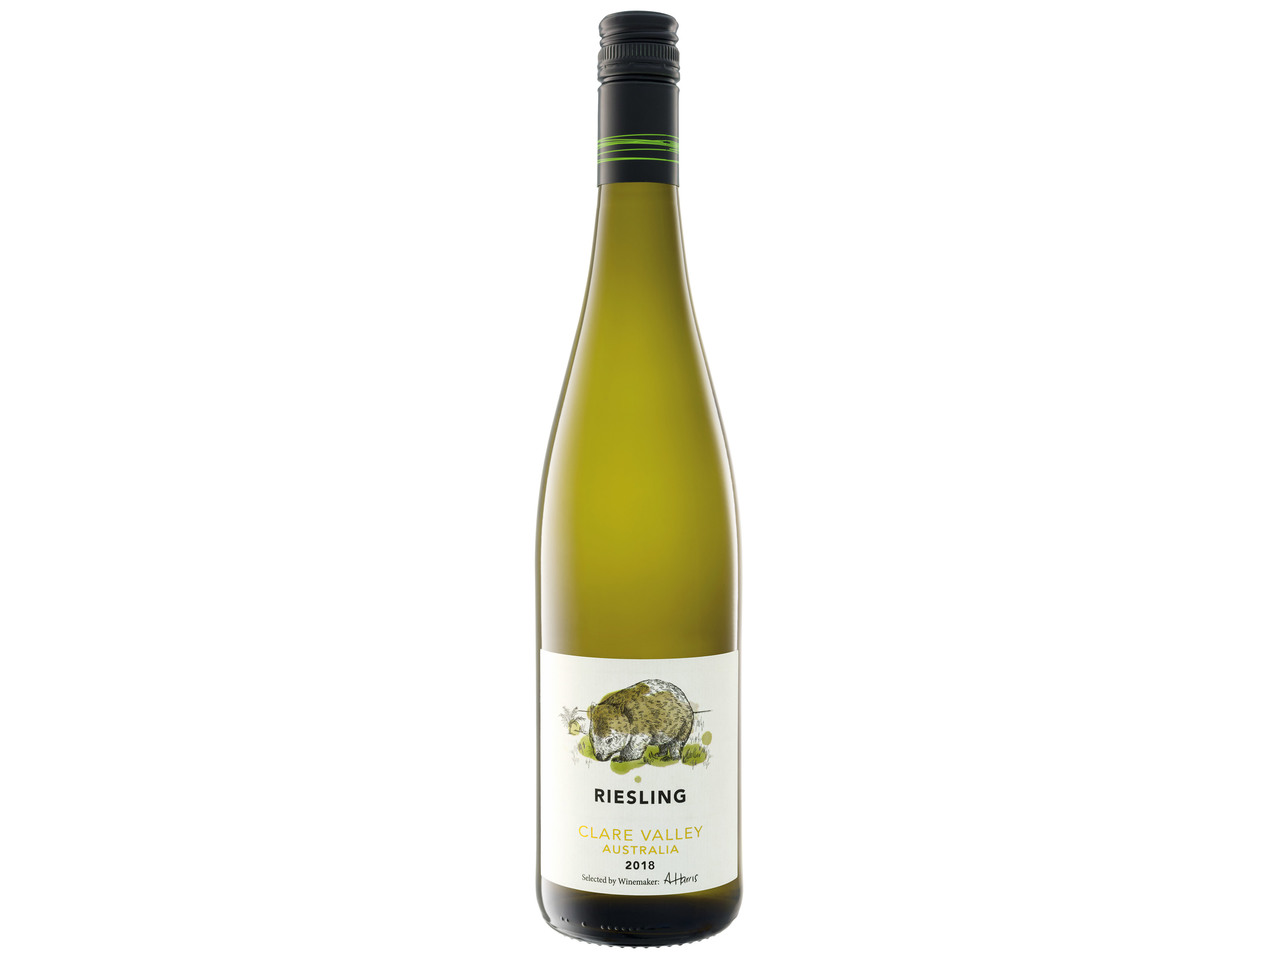 RIESLING CLARE VALLEY 2018 AUSTRALIE